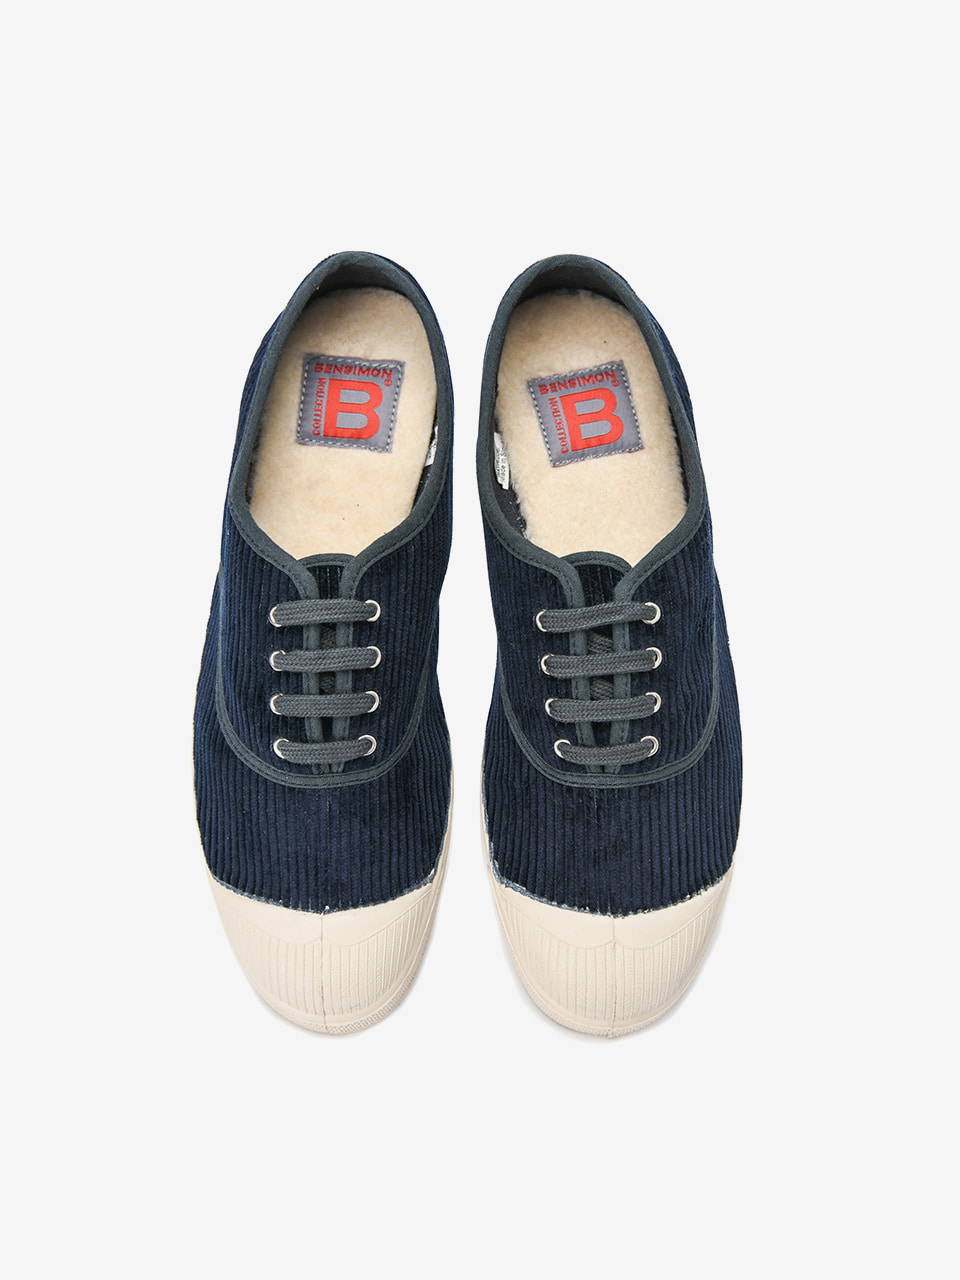 LIMITED WOMAN LACET CORDUROY - NAVY